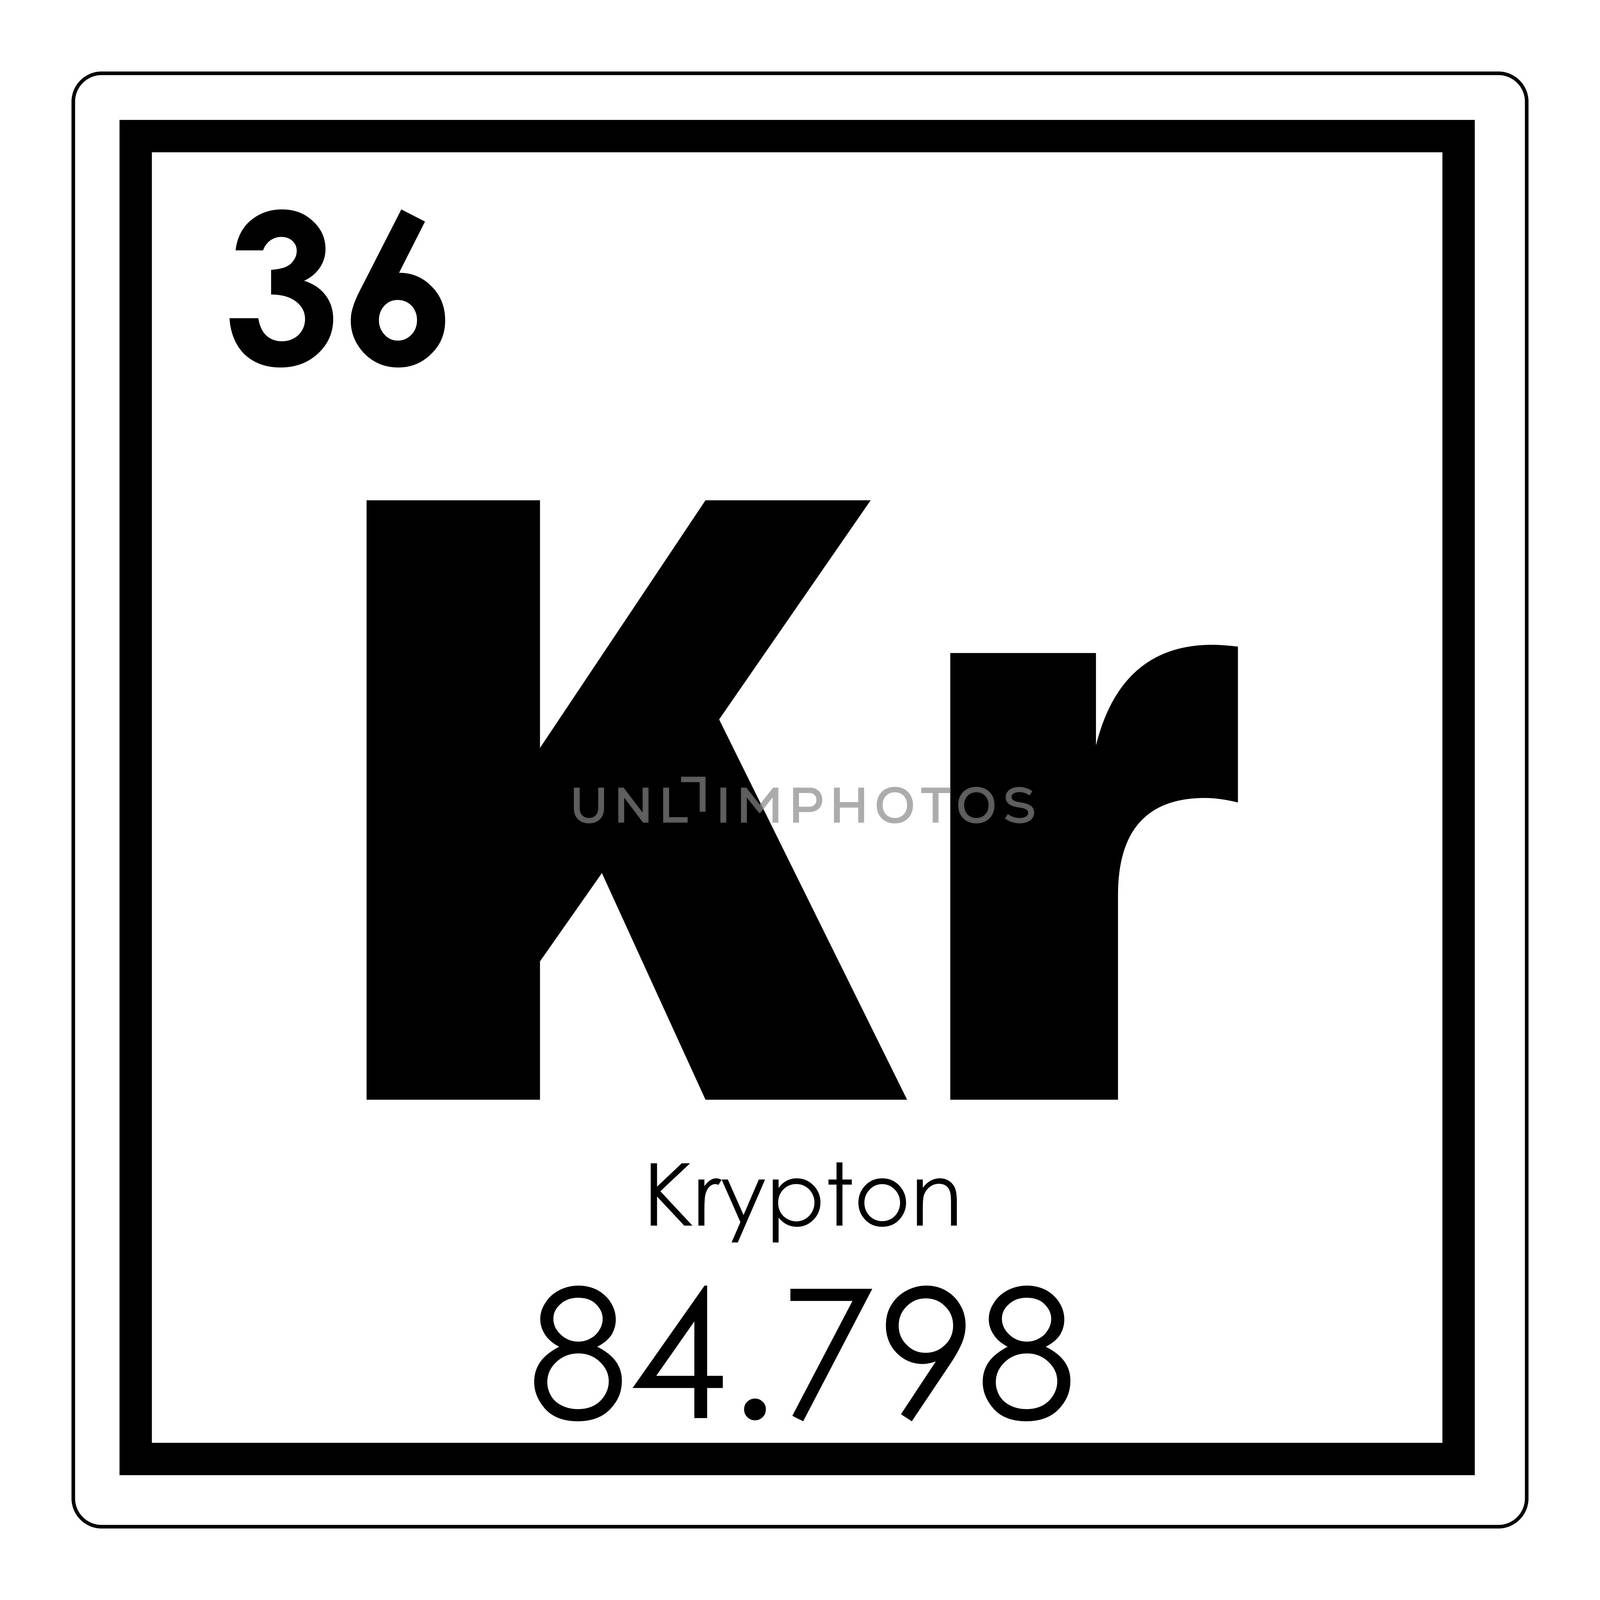 Krypton chemical element periodic table science symbol